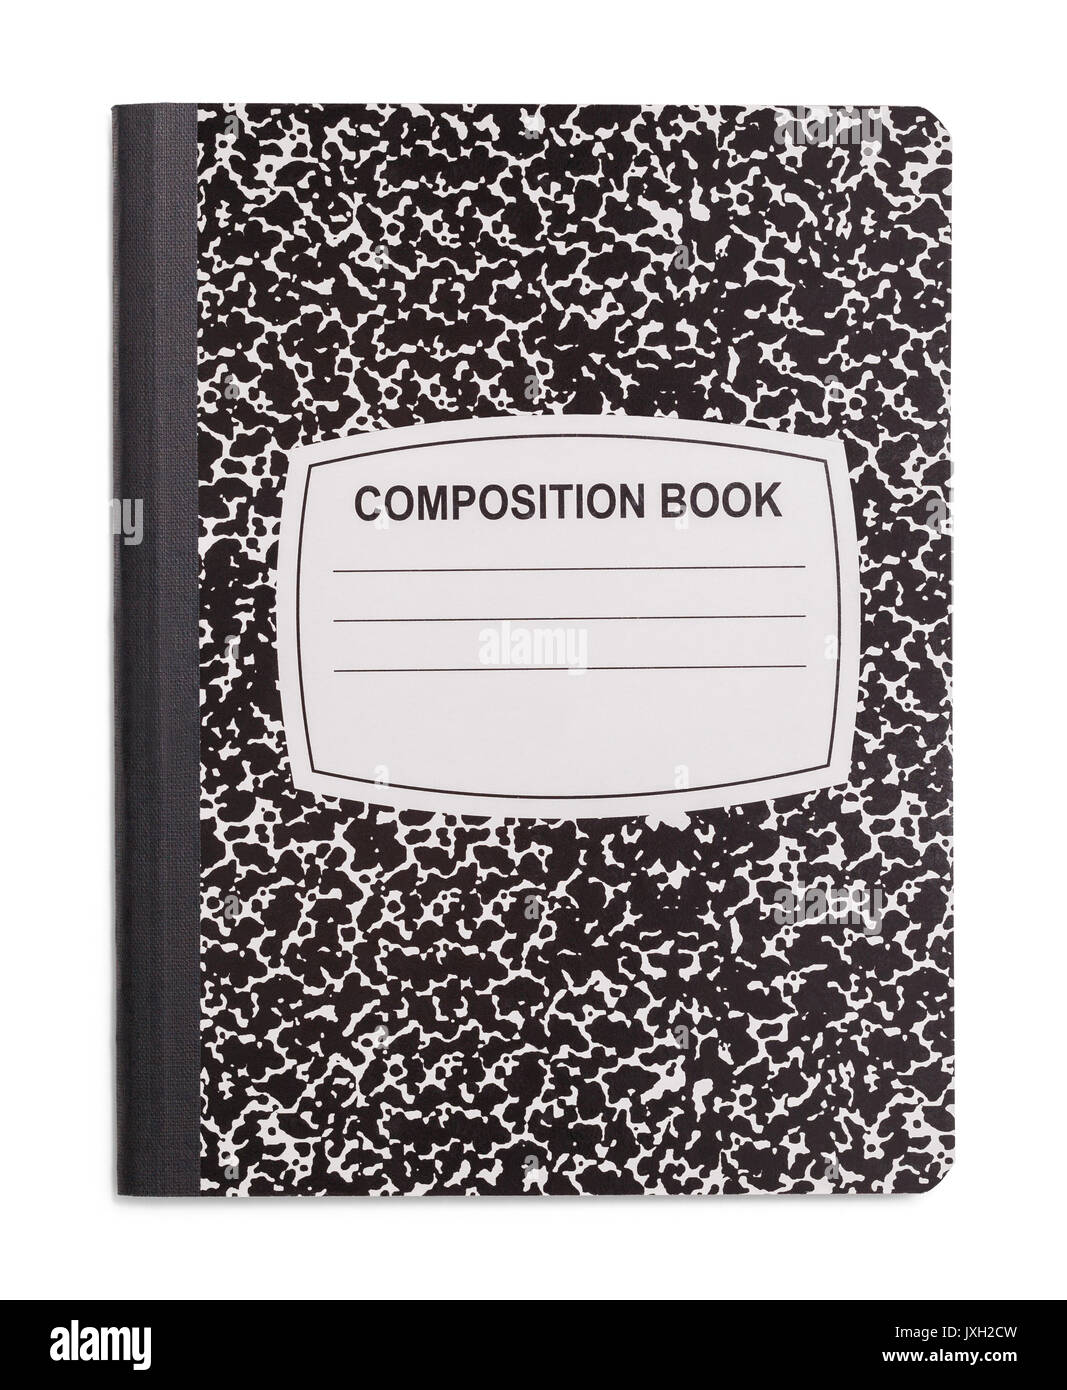 Black and White Composition Book Isolated on White Background. Stock Photo